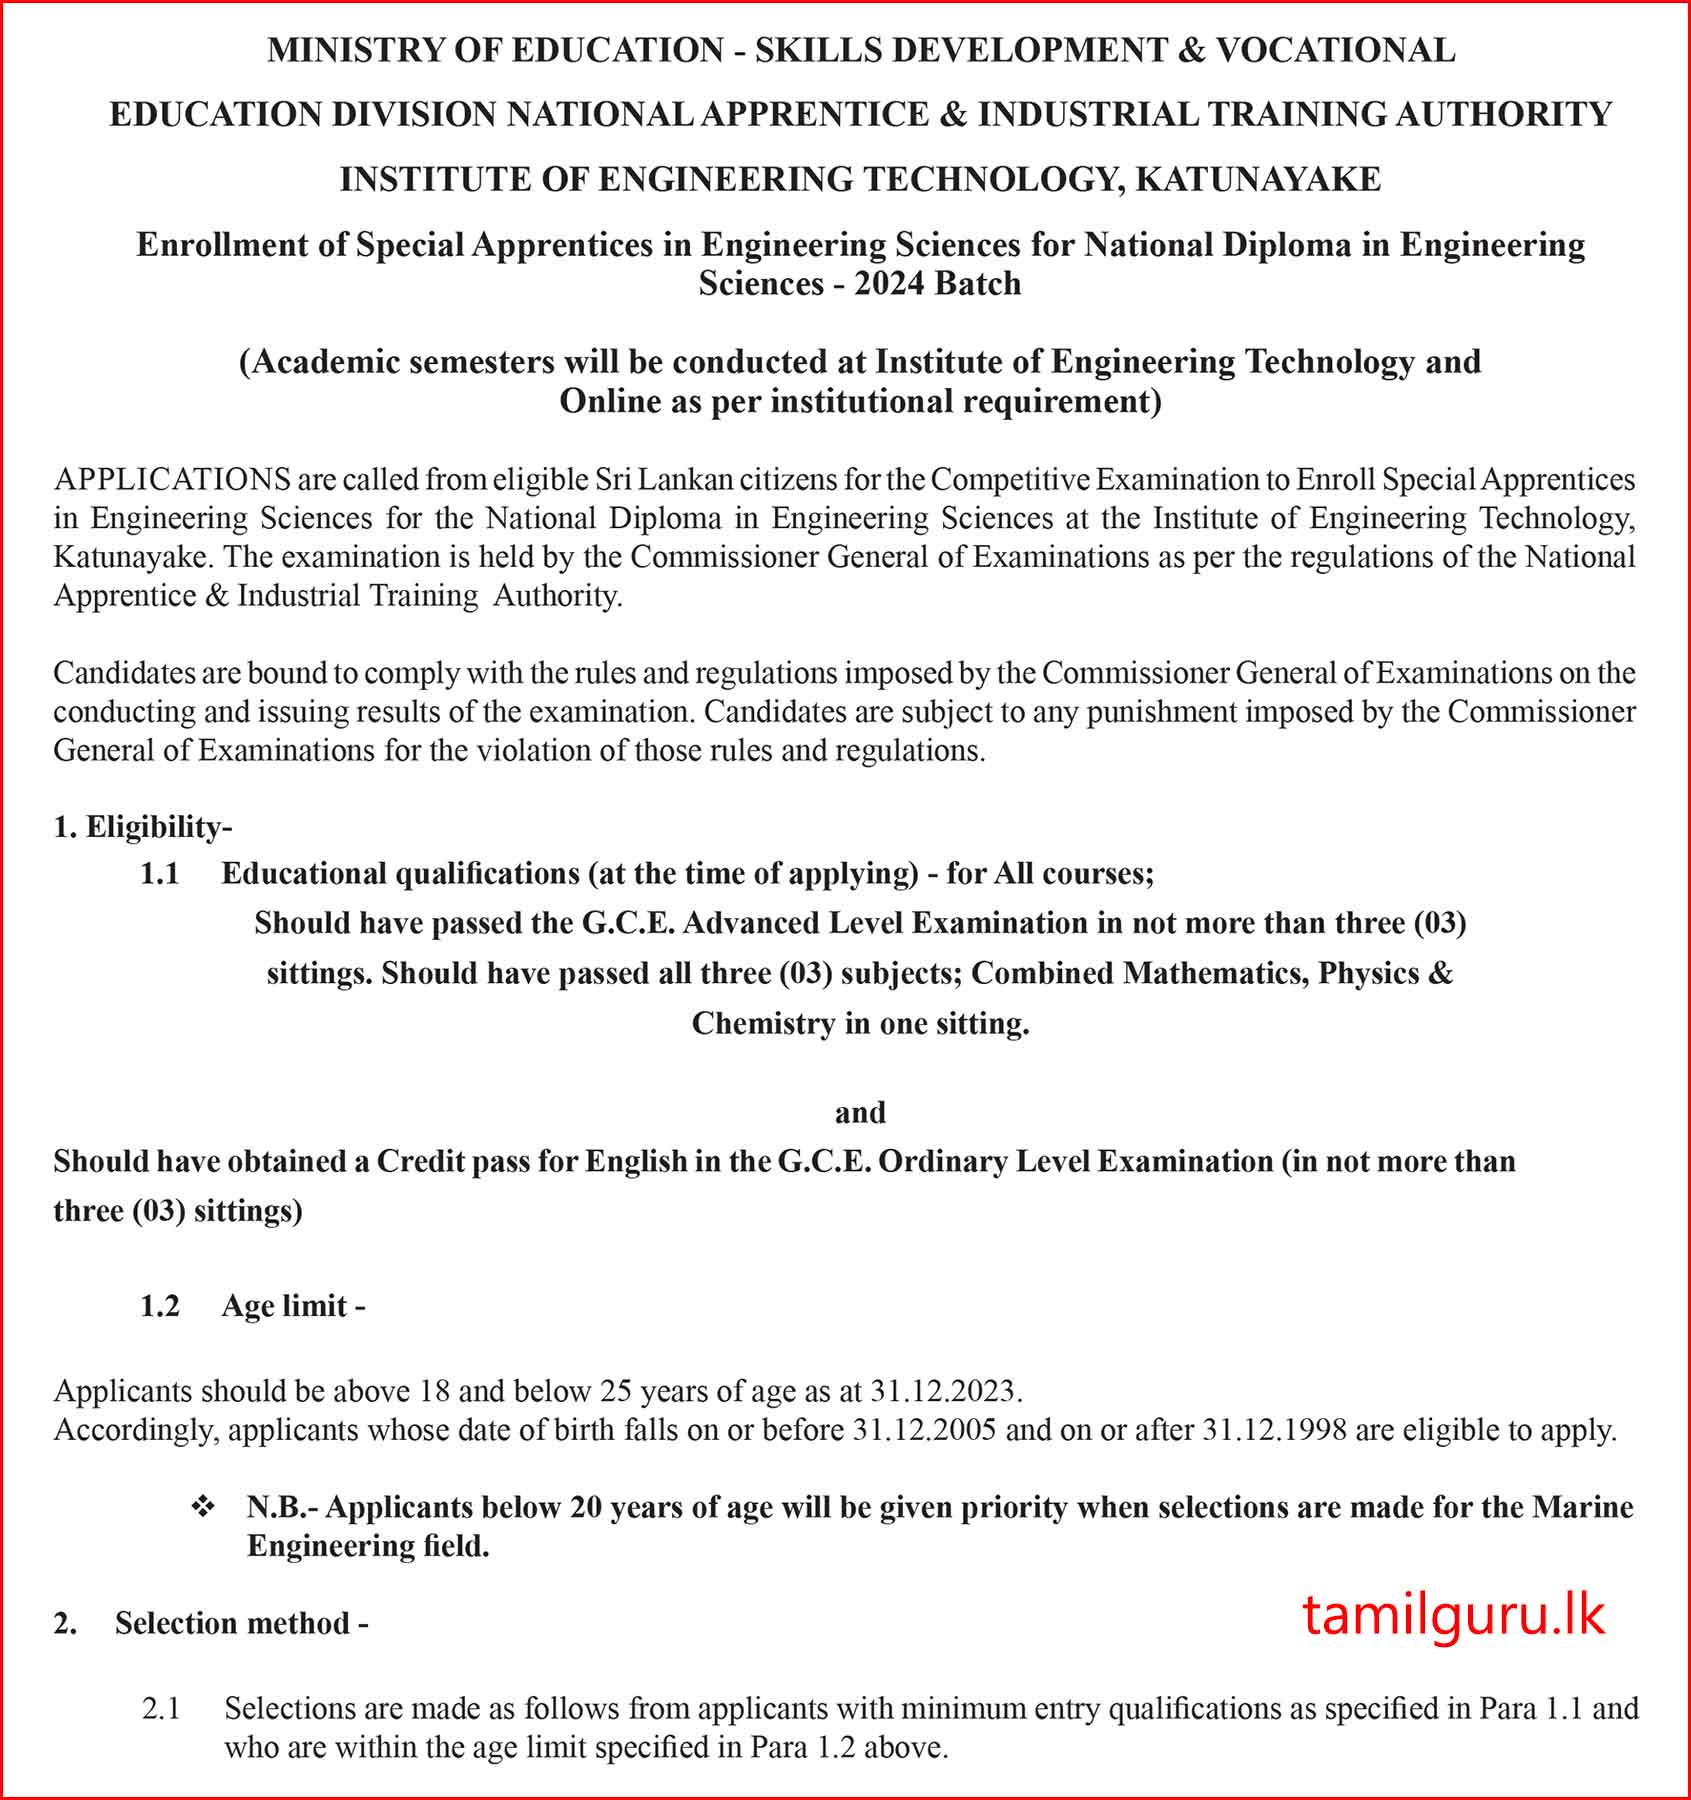 Admission for National Diploma in Engineering Sciences (NDES) Courses 2024 - IET / TTI Katunayake